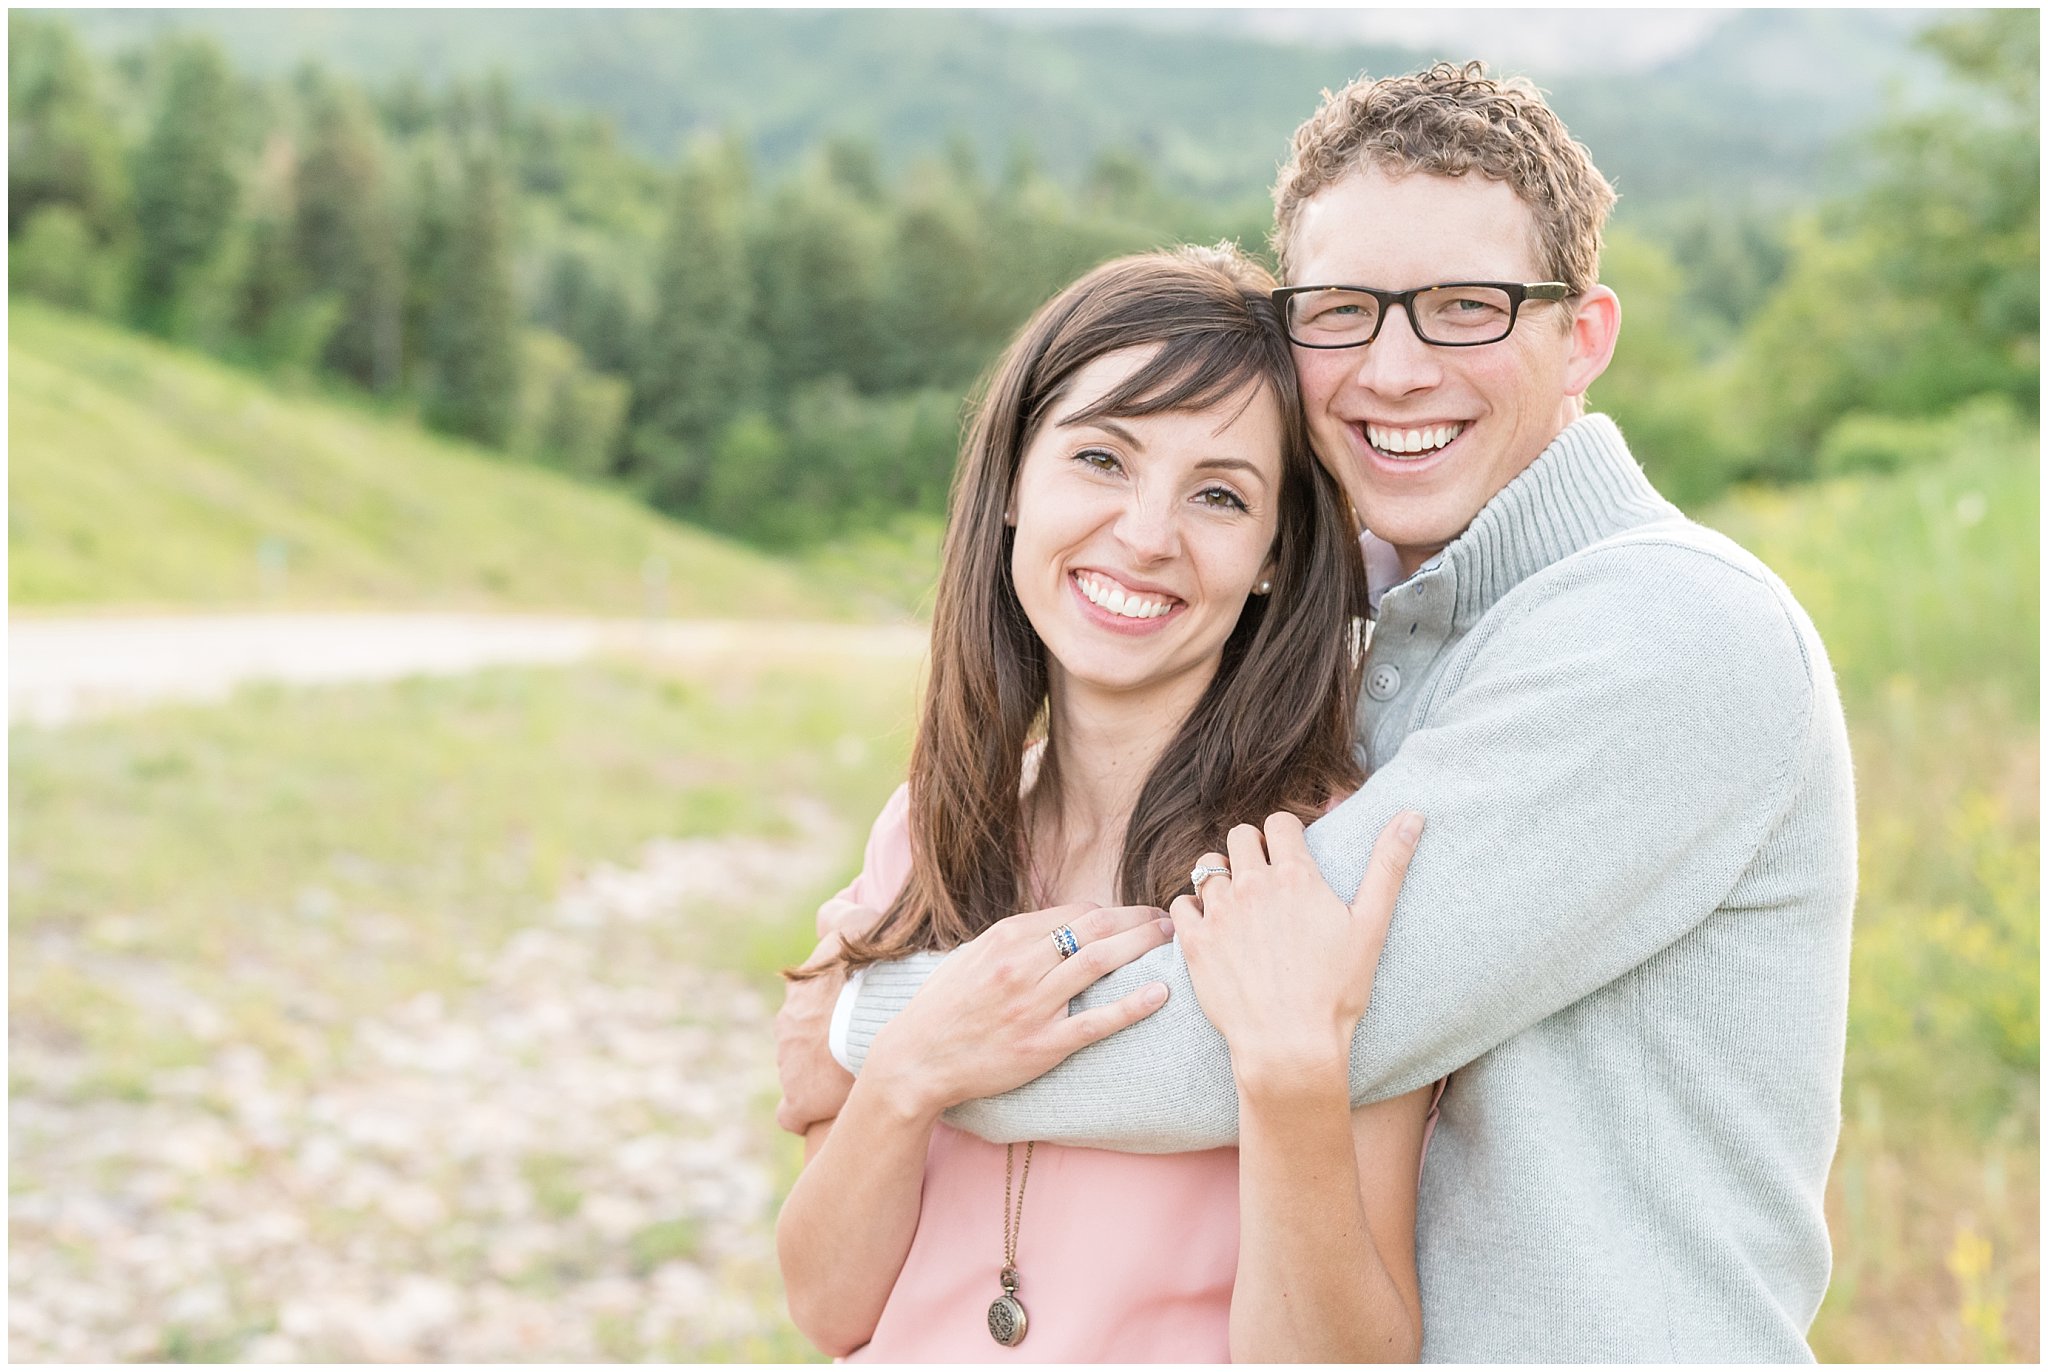 Joyful couple smiling pictures with mountains behind them | Utah couples photography at Snowbasin